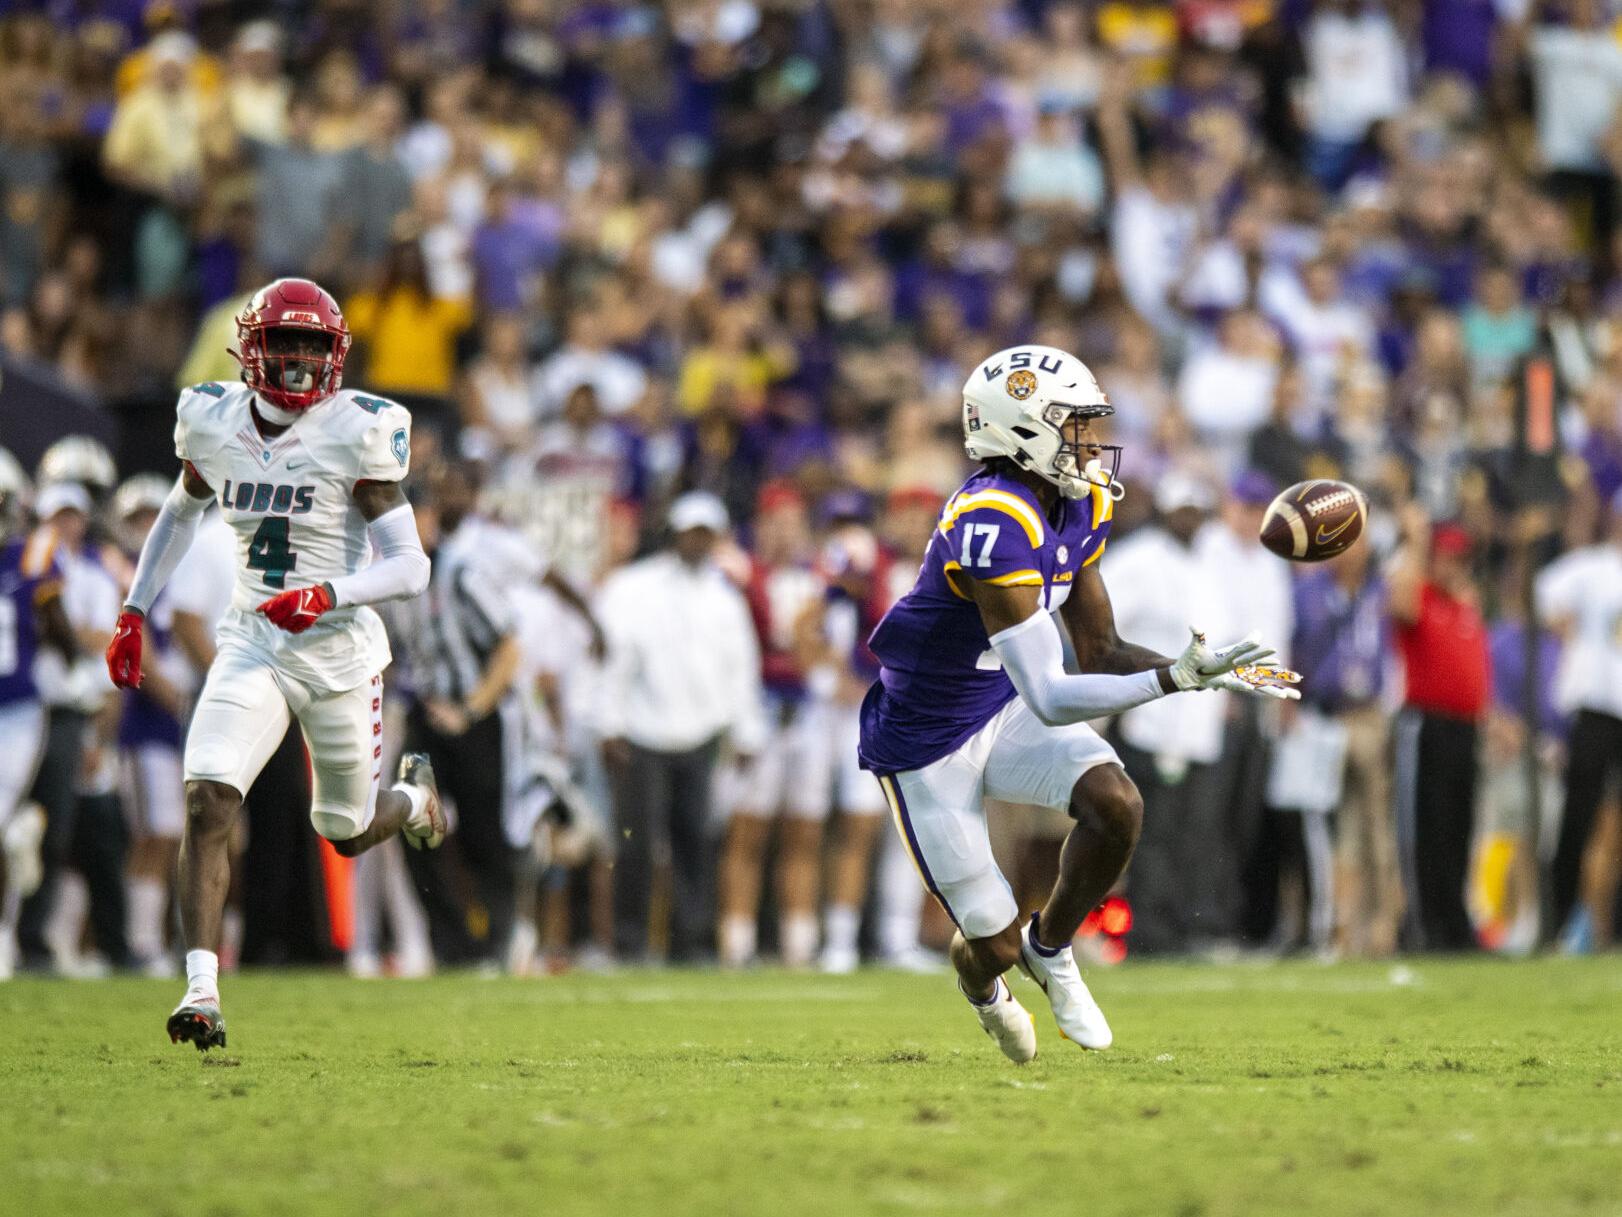 LSU receiver Chris Hilton expected to miss the rest of the season after shoulder surgery 